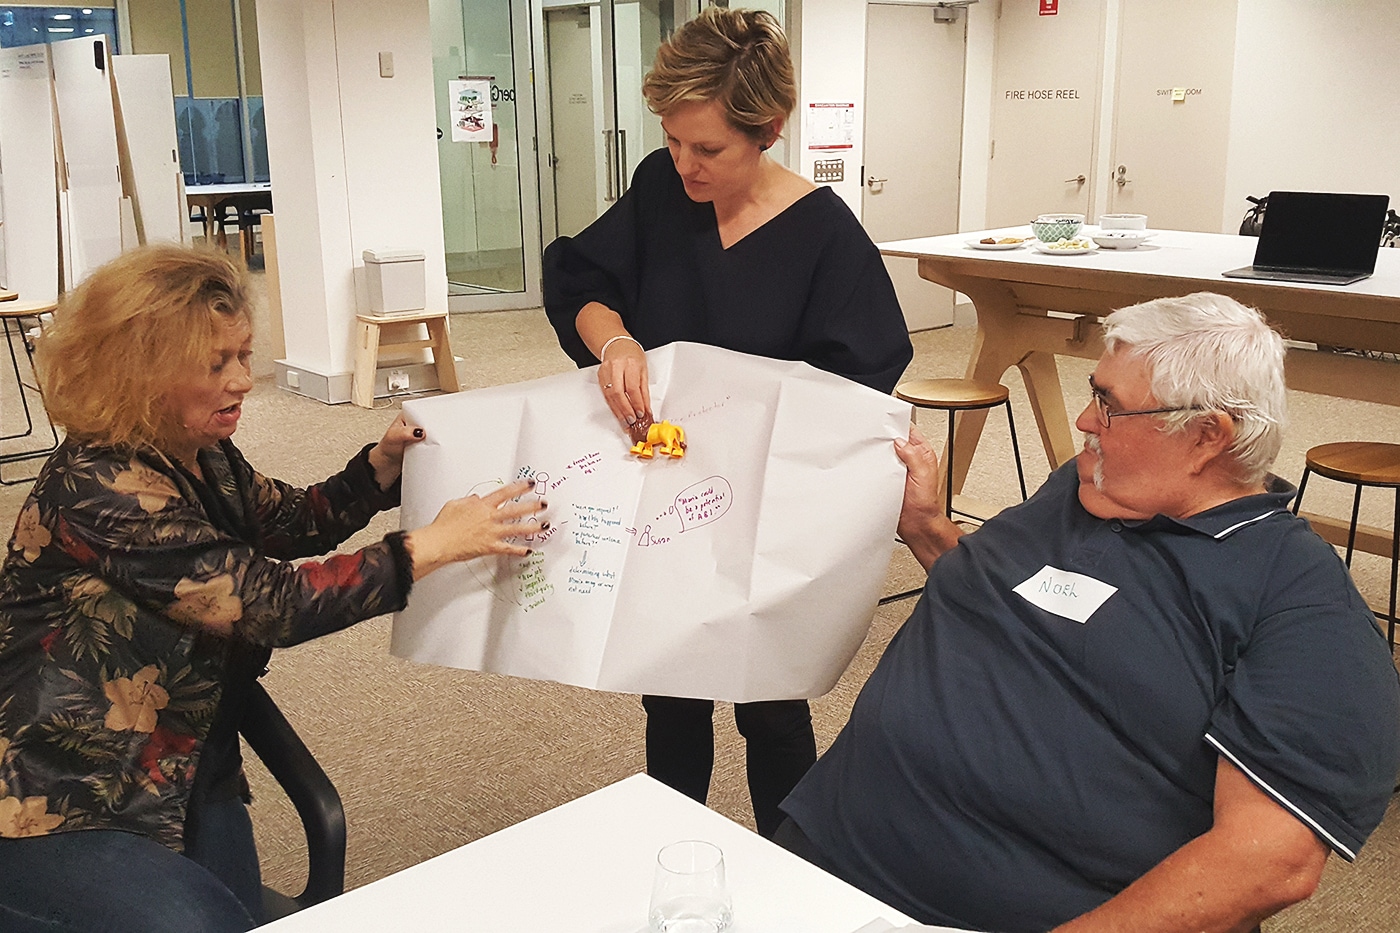 People with lived experience sharing back during a co-design workshop